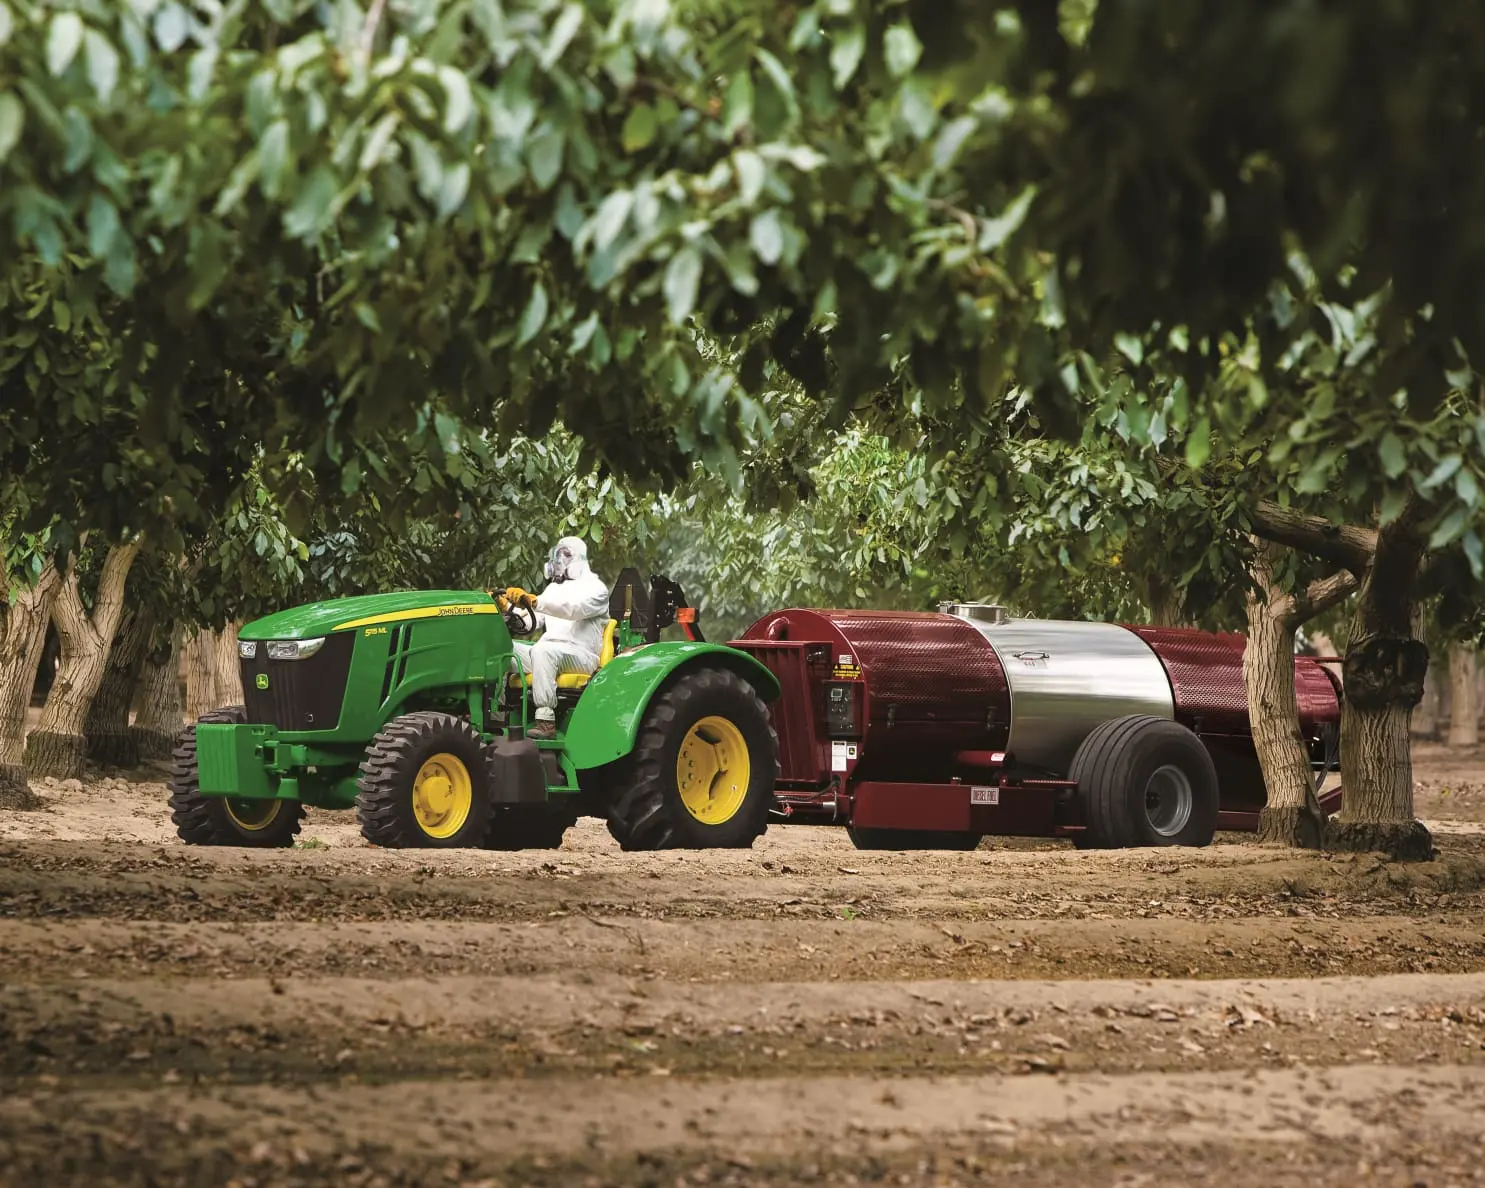 SAVE UP TO 65% OFF ON A NEW TRACTOR